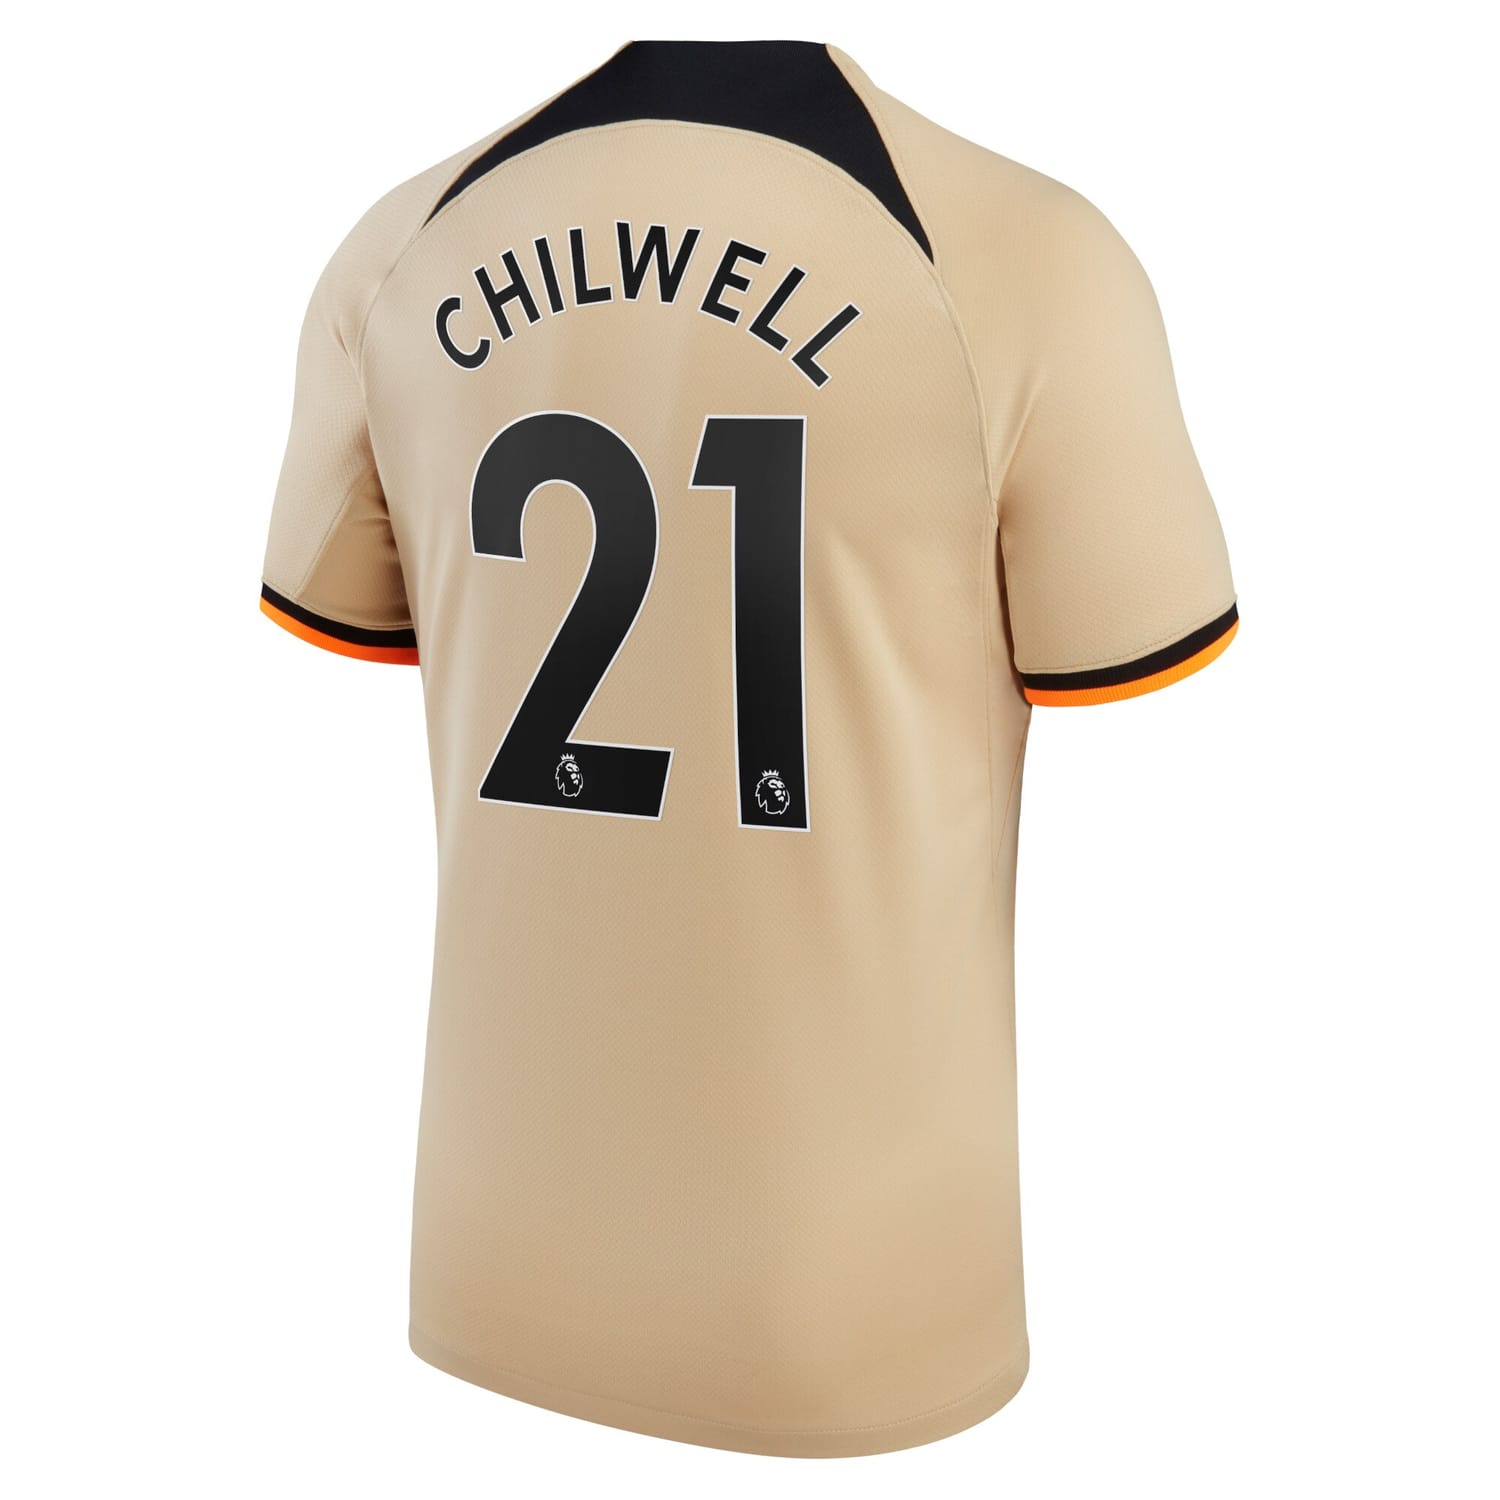 Premier League Chelsea Third Jersey Shirt 2022-23 player Ben Chilwell 21 printing for Men